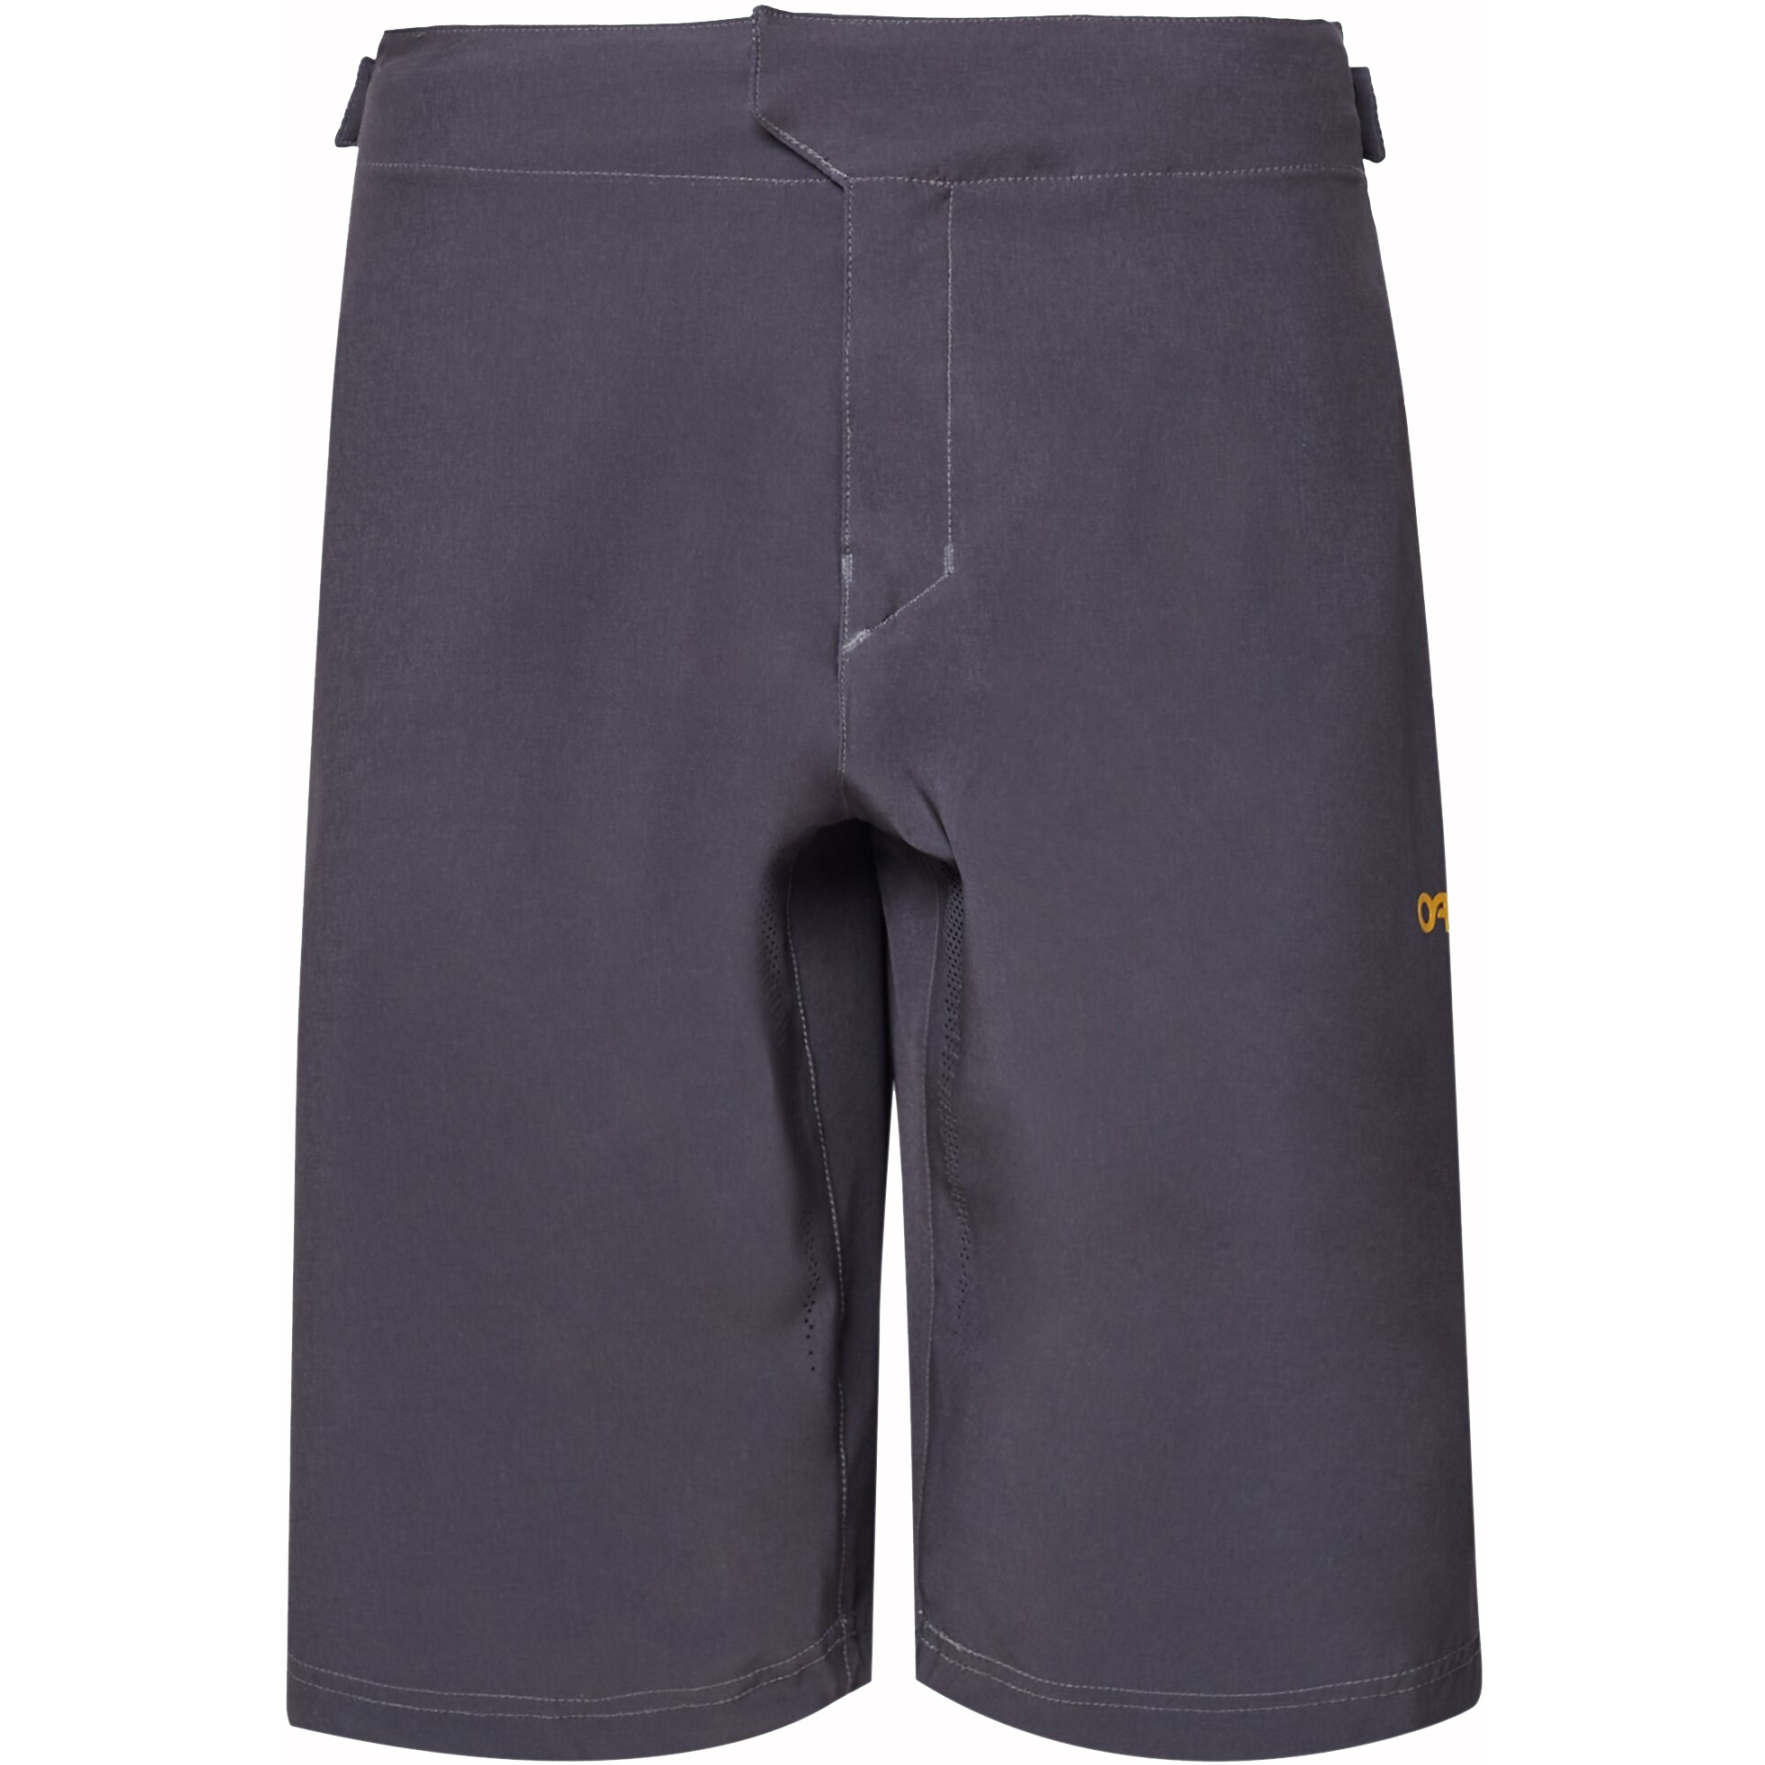 Picture of Oakley Reduct Berm Shorts Men - Forged Iron